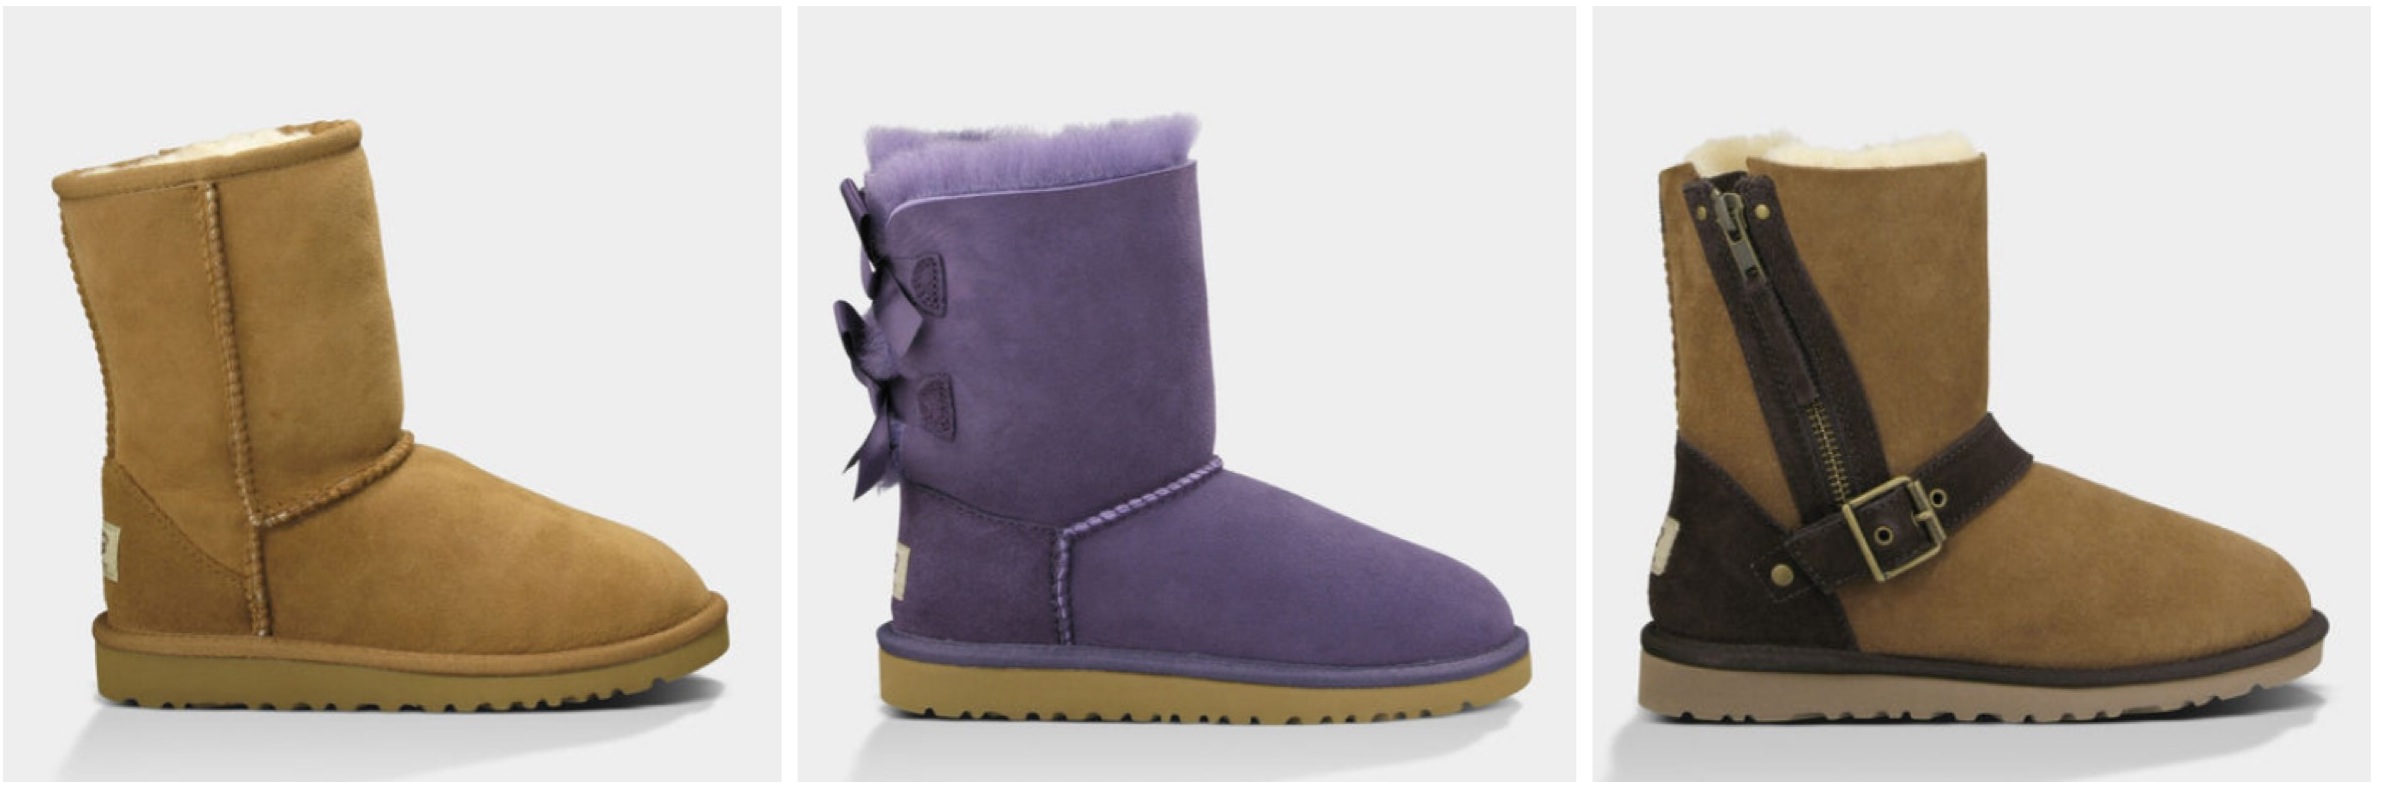 childrens ugg type boots